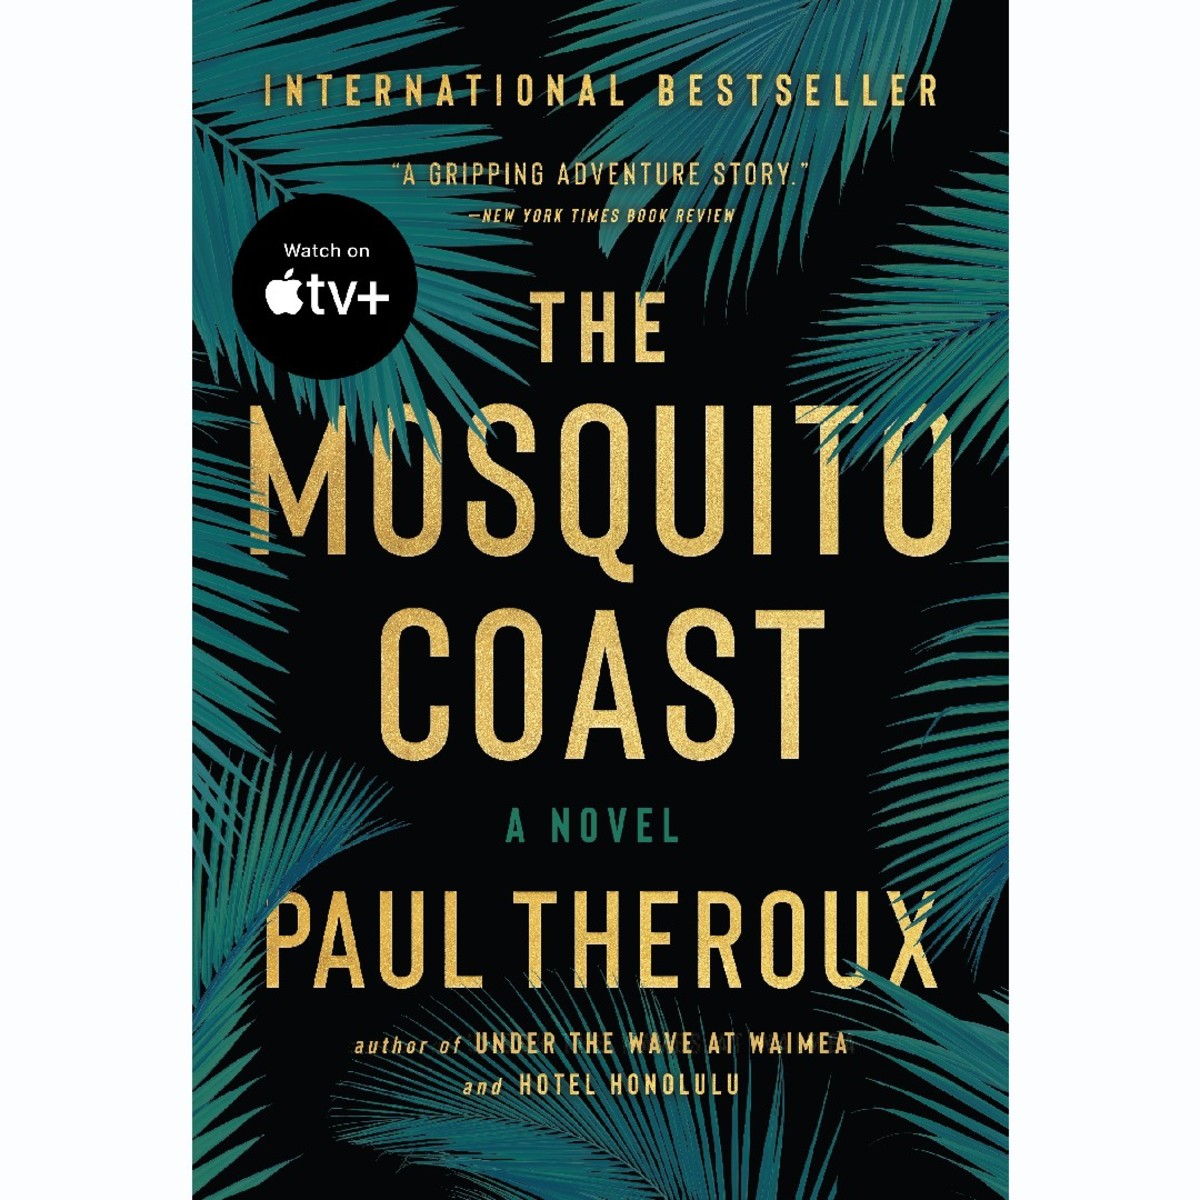 'The Mosquito Coast' by Paul Theroux